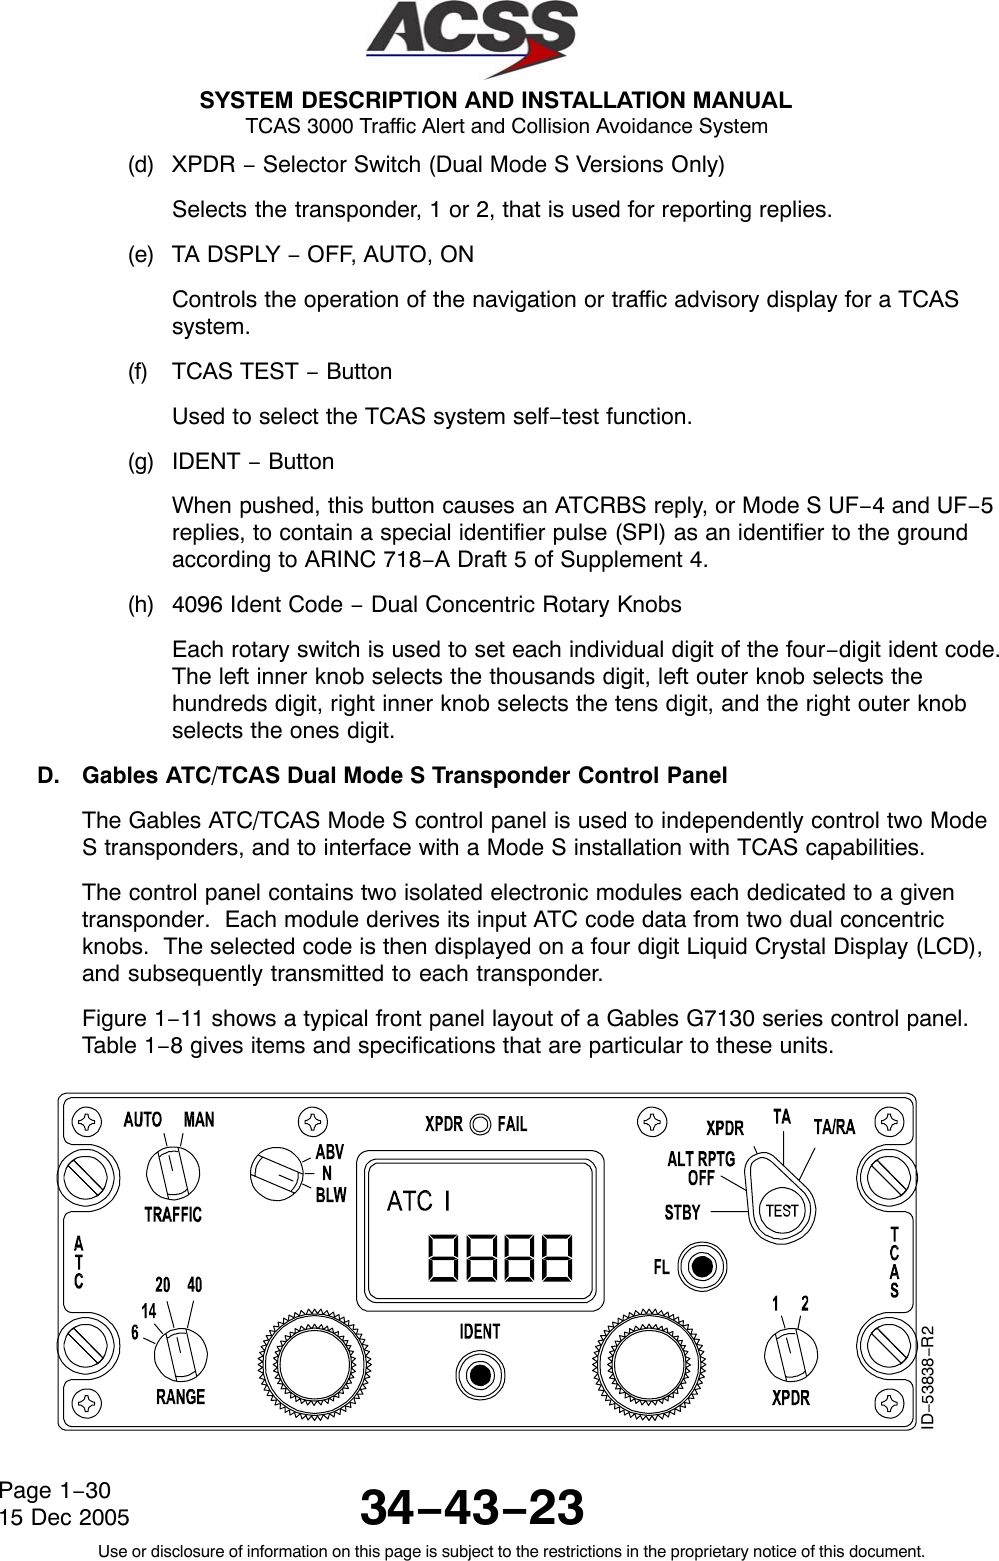  SYSTEM DESCRIPTION AND INSTALLATION MANUAL TCAS 3000 Traffic Alert and Collision Avoidance System34−43−23Use or disclosure of information on this page is subject to the restrictions in the proprietary notice of this document.Page 1−3015 Dec 2005(d) XPDR − Selector Switch (Dual Mode S Versions Only)Selects the transponder, 1 or 2, that is used for reporting replies.(e) TA DSPLY − OFF, AUTO, ONControls the operation of the navigation or traffic advisory display for a TCASsystem.(f) TCAS TEST − ButtonUsed to select the TCAS system self−test function.(g) IDENT − ButtonWhen pushed, this button causes an ATCRBS reply, or Mode S UF−4 and UF−5replies, to contain a special identifier pulse (SPI) as an identifier to the groundaccording to ARINC 718−A Draft 5 of Supplement 4.(h) 4096 Ident Code − Dual Concentric Rotary KnobsEach rotary switch is used to set each individual digit of the four−digit ident code.The left inner knob selects the thousands digit, left outer knob selects thehundreds digit, right inner knob selects the tens digit, and the right outer knobselects the ones digit.D. Gables ATC/TCAS Dual Mode S Transponder Control PanelThe Gables ATC/TCAS Mode S control panel is used to independently control two ModeS transponders, and to interface with a Mode S installation with TCAS capabilities.The control panel contains two isolated electronic modules each dedicated to a giventransponder.  Each module derives its input ATC code data from two dual concentricknobs.  The selected code is then displayed on a four digit Liquid Crystal Display (LCD),and subsequently transmitted to each transponder.Figure 1−11 shows a typical front panel layout of a Gables G7130 series control panel.Table 1−8 gives items and specifications that are particular to these units.ID−53838−R2